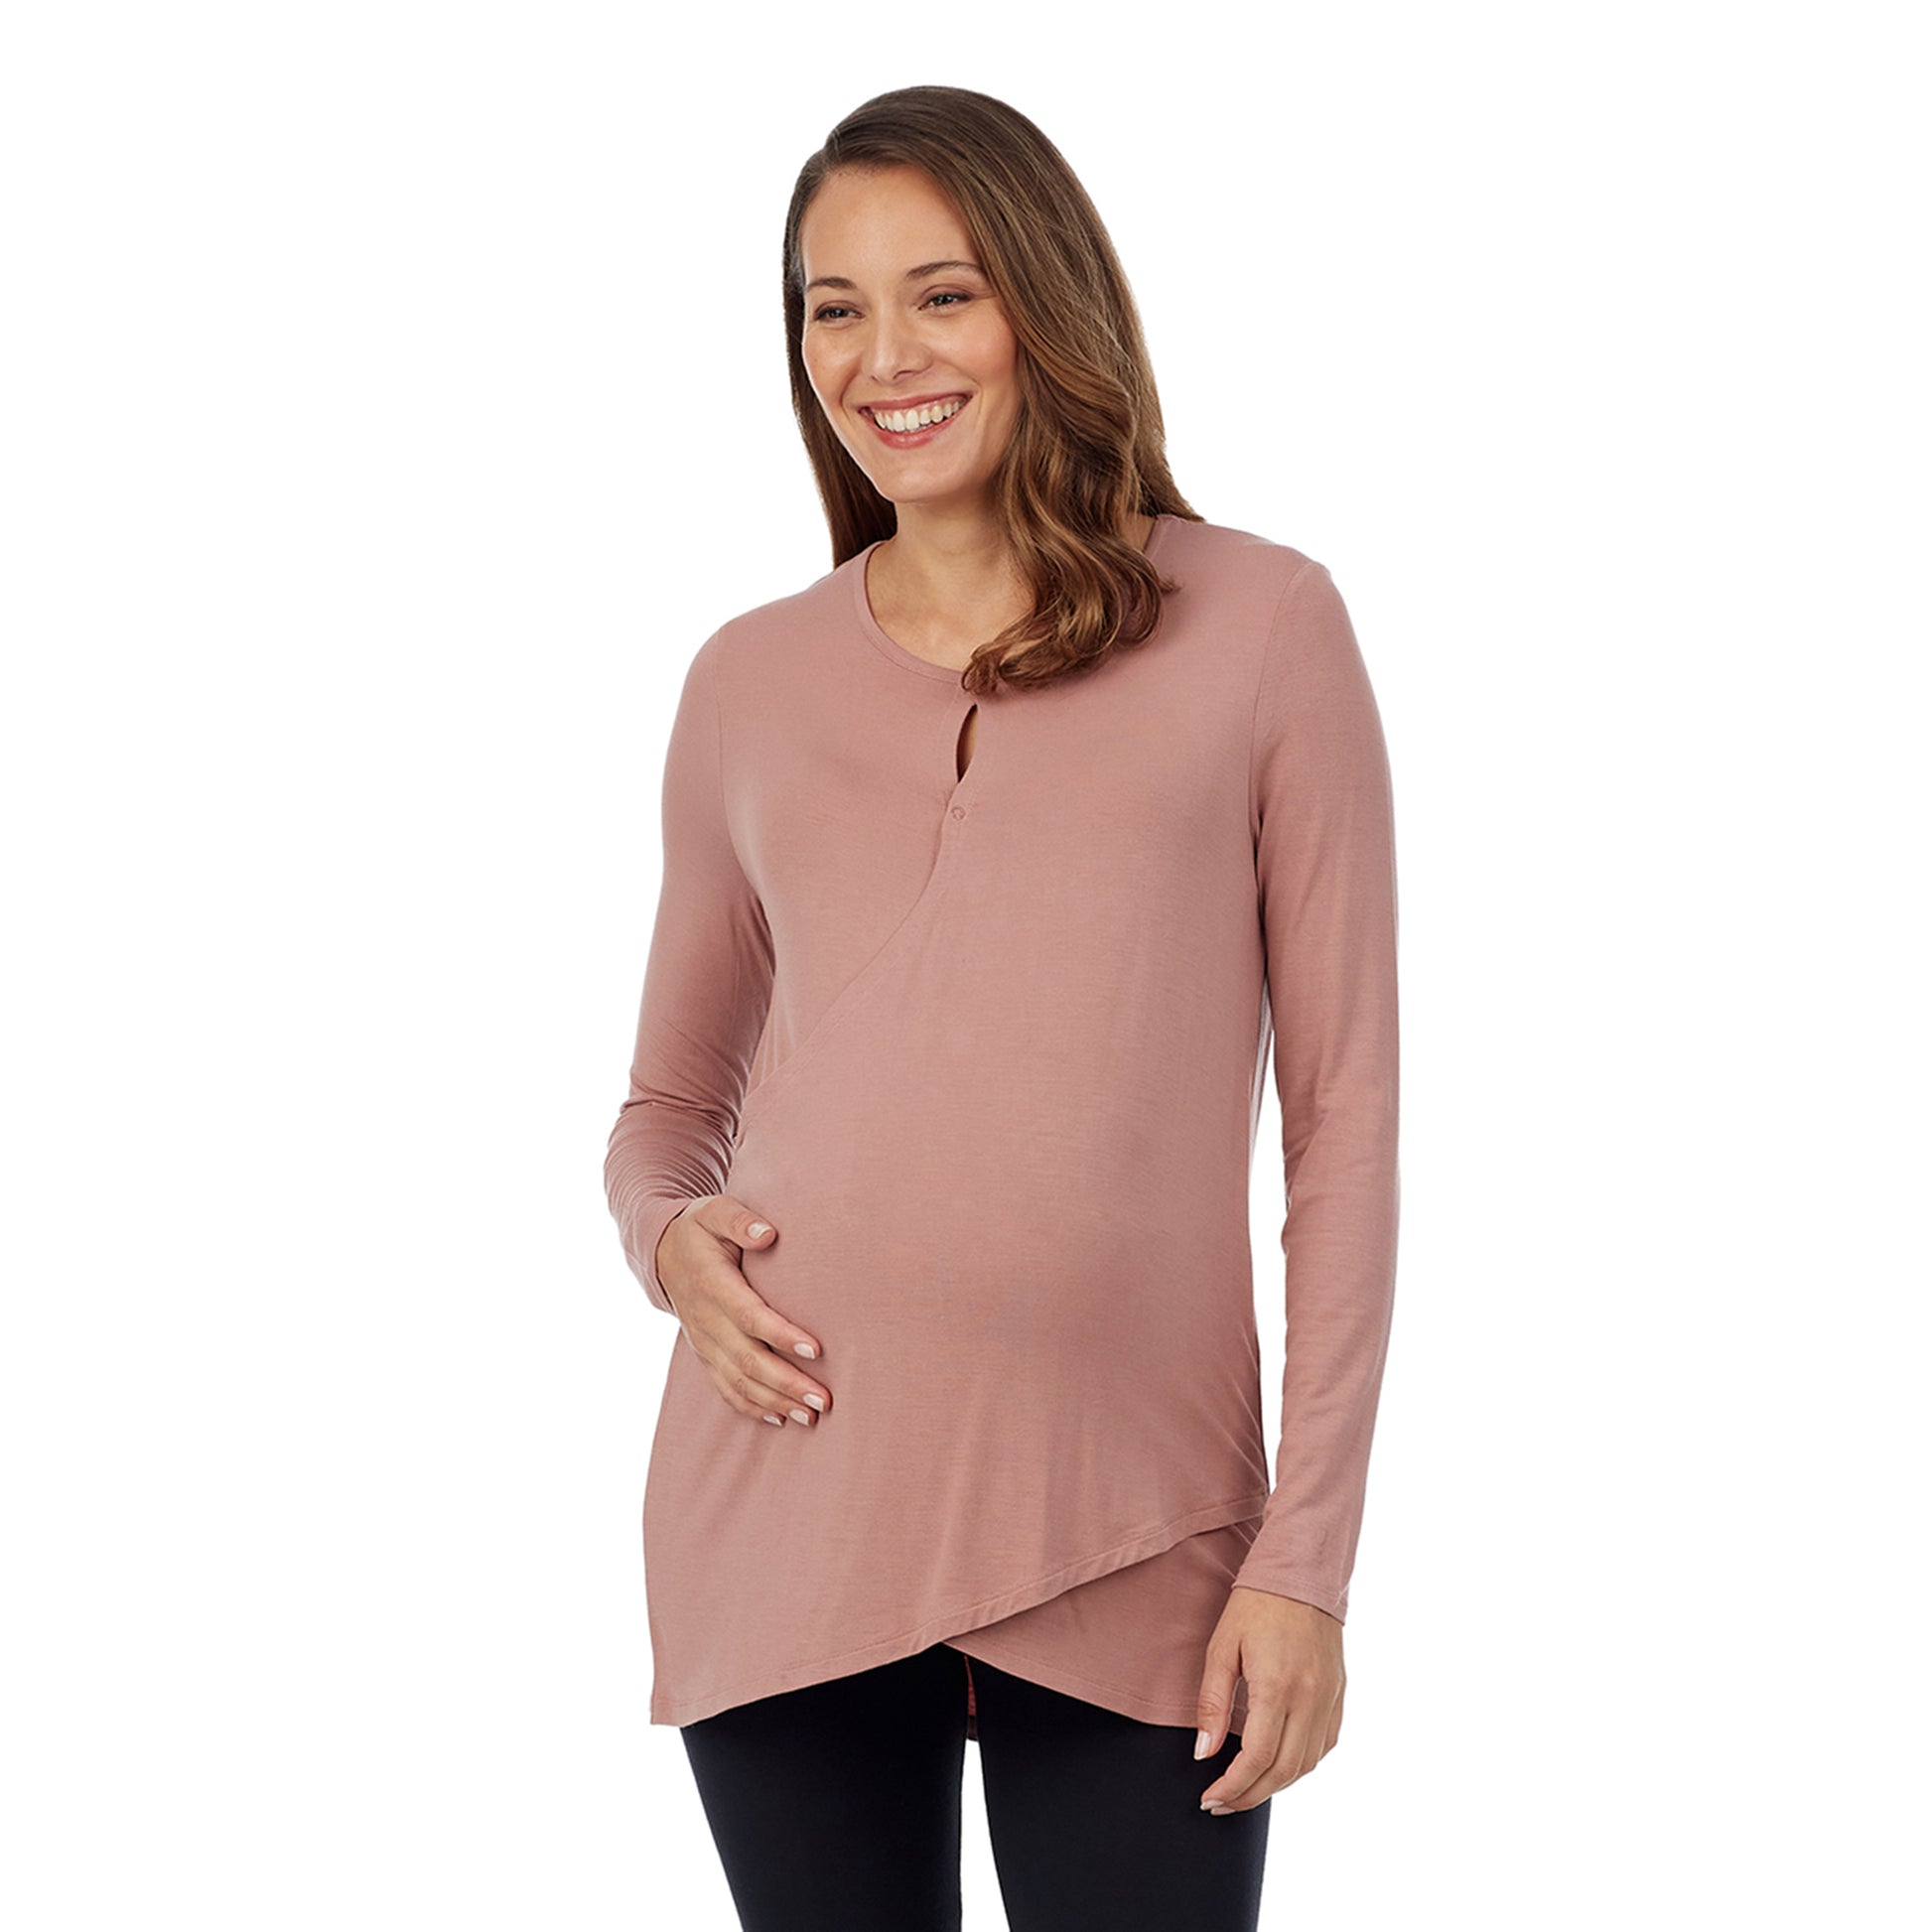 Mink Taupe;Model is wearing a size S. She is 5’10”, Bust 34”, Waist 26”, Hips 36”.@A lady wearing a bright coral long sleeve maternity wrap front top. #Model is wearing a maternity bump.